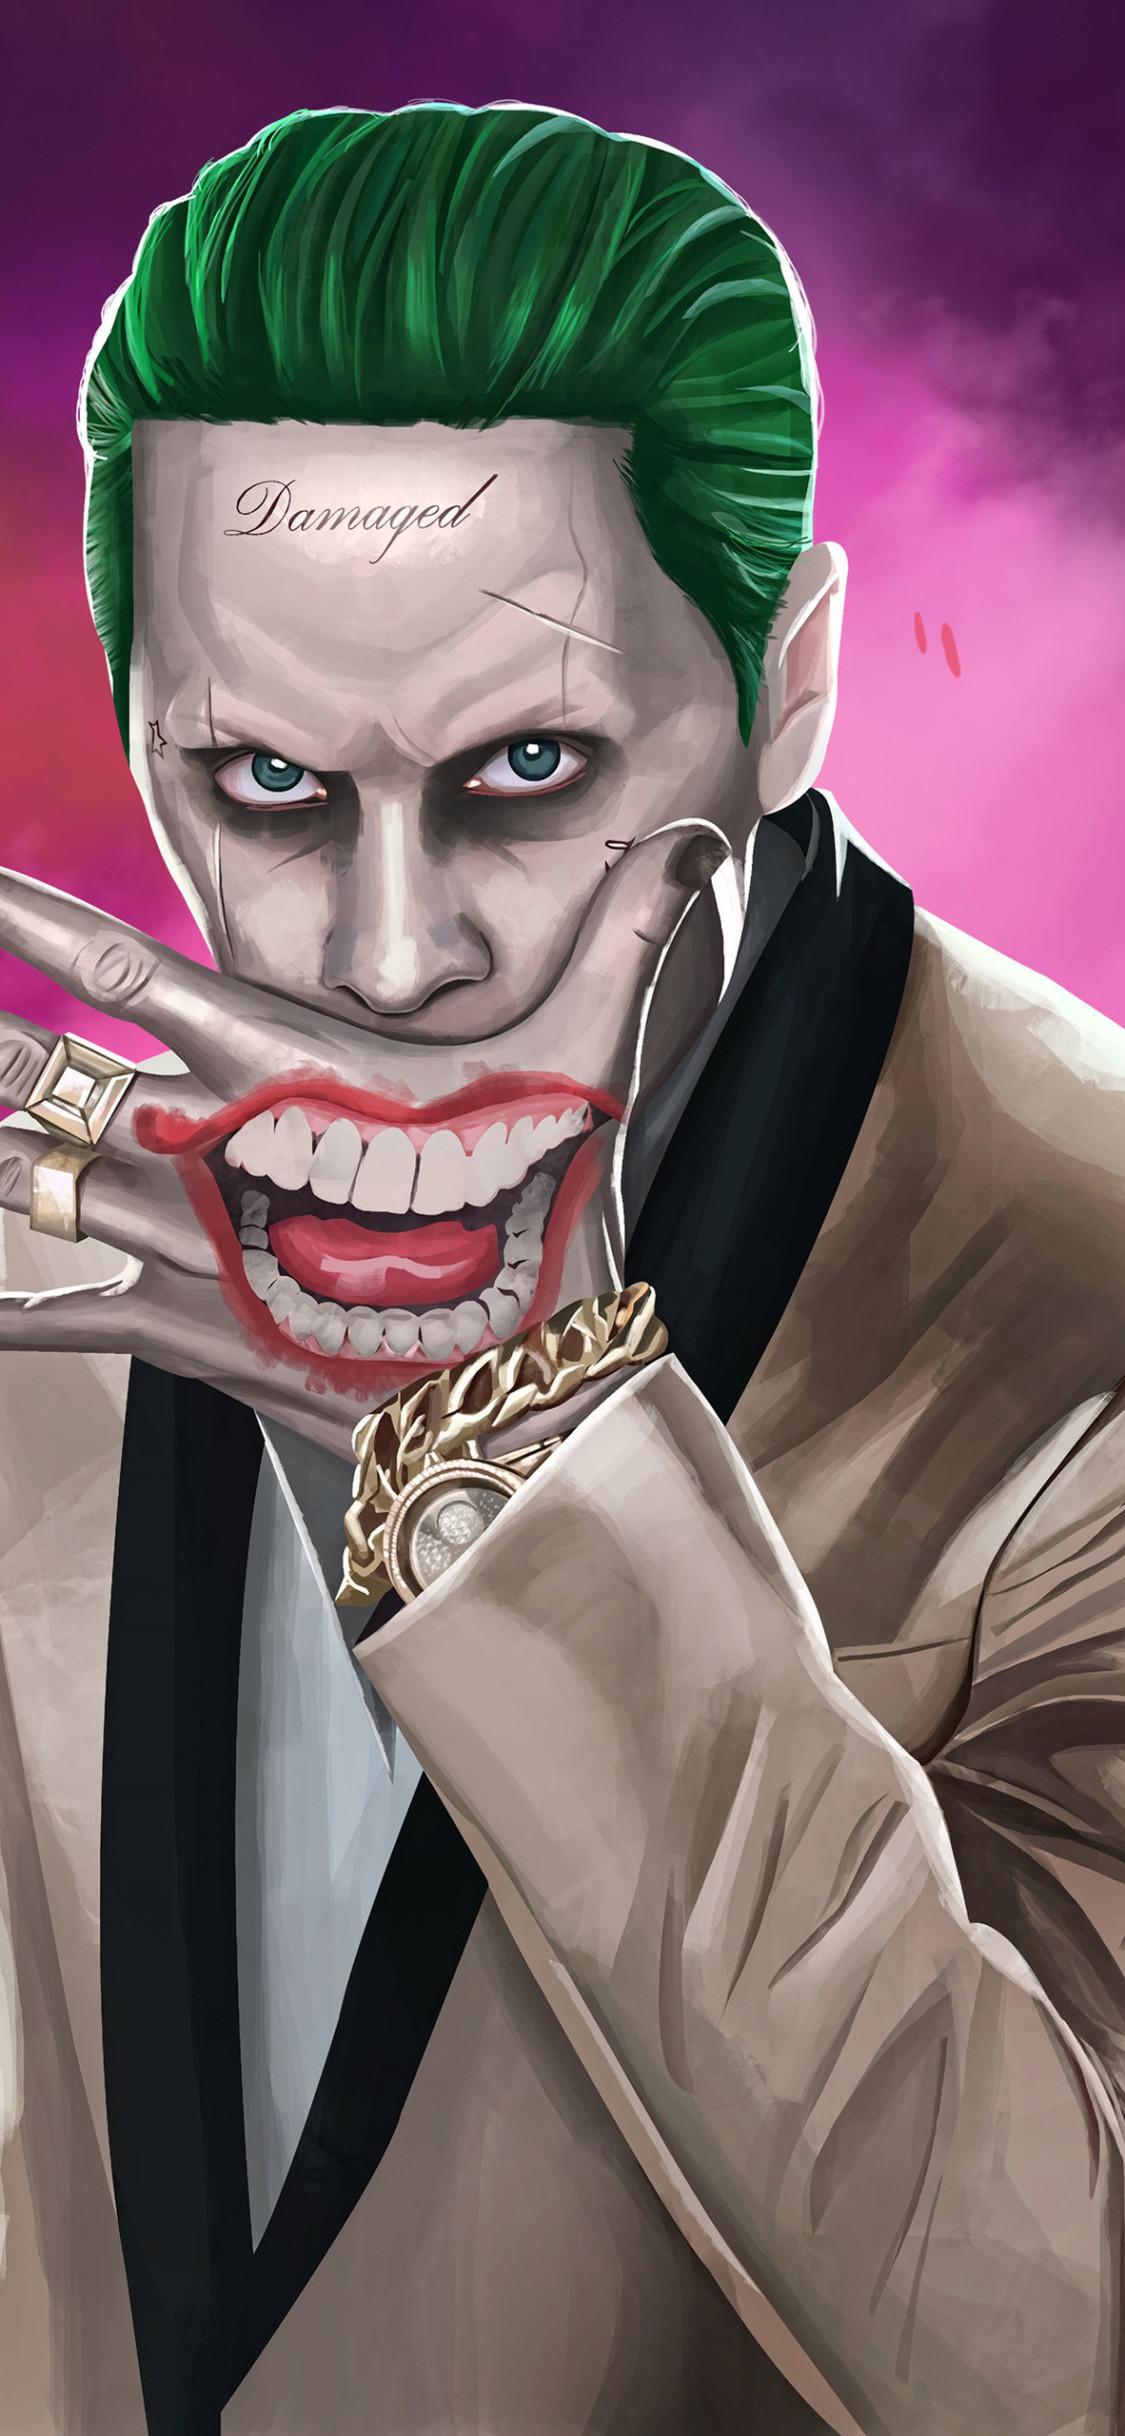 download the new version for iphoneJoker